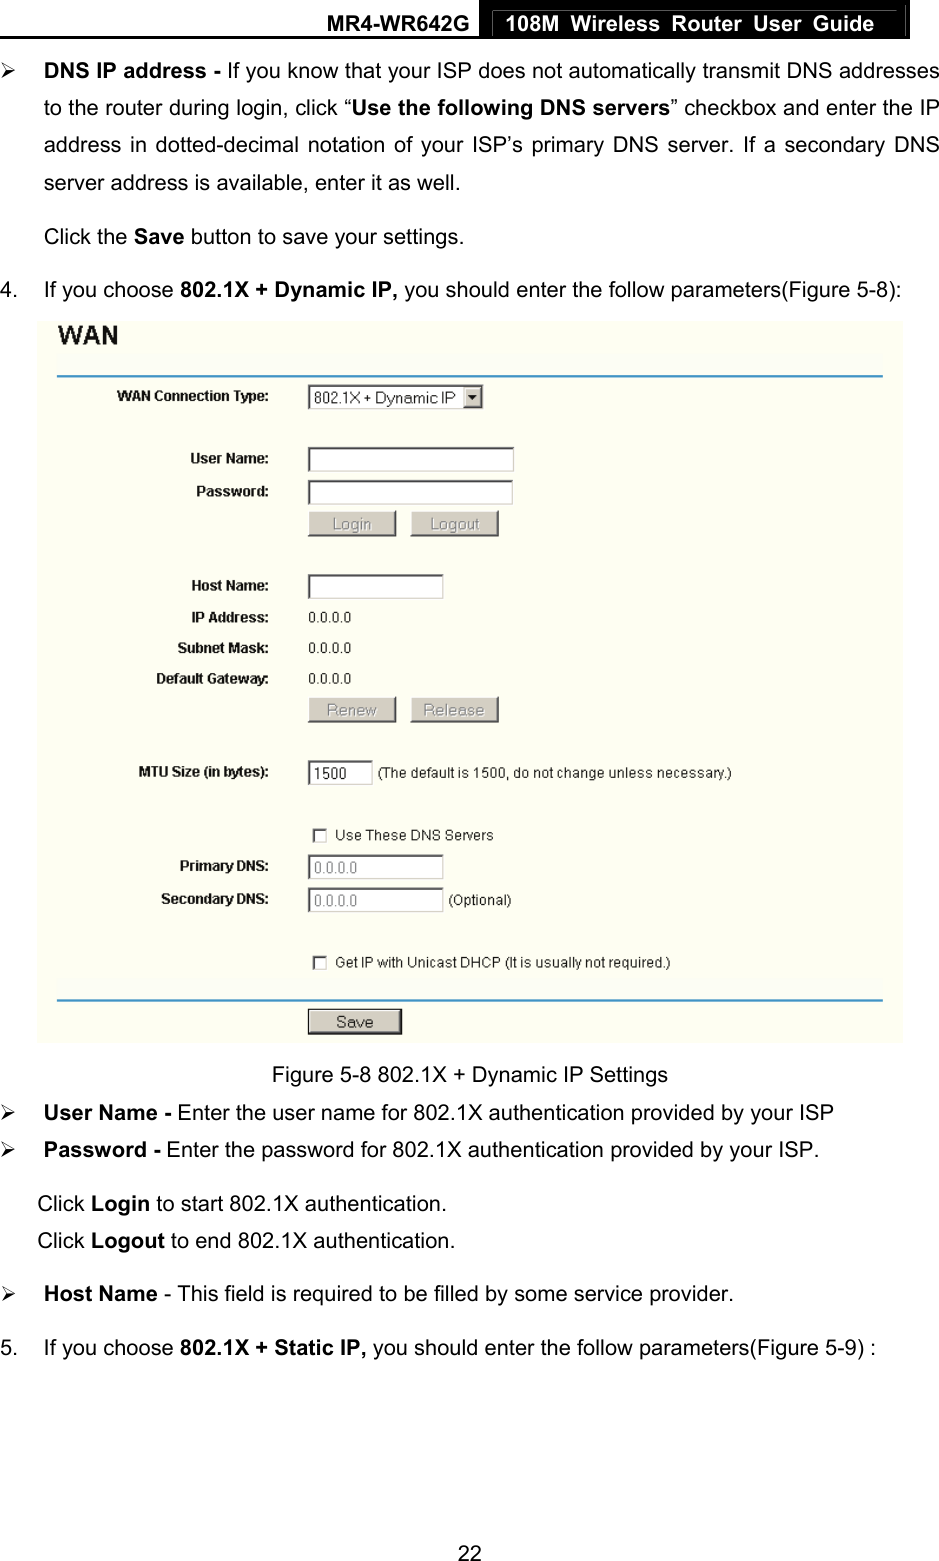 MR4-WR642G 108M Wireless Router User Guide   22¾ DNS IP address - If you know that your ISP does not automatically transmit DNS addresses to the router during login, click “Use the following DNS servers” checkbox and enter the IP address in dotted-decimal notation of your ISP’s primary DNS server. If a secondary DNS server address is available, enter it as well. Click the Save button to save your settings. 4.  If you choose 802.1X + Dynamic IP, you should enter the follow parameters(Figure 5-8):  Figure 5-8 802.1X + Dynamic IP Settings ¾ User Name - Enter the user name for 802.1X authentication provided by your ISP ¾ Password - Enter the password for 802.1X authentication provided by your ISP. Click Login to start 802.1X authentication. Click Logout to end 802.1X authentication. ¾ Host Name - This field is required to be filled by some service provider. 5.  If you choose 802.1X + Static IP, you should enter the follow parameters(Figure 5-9) : 